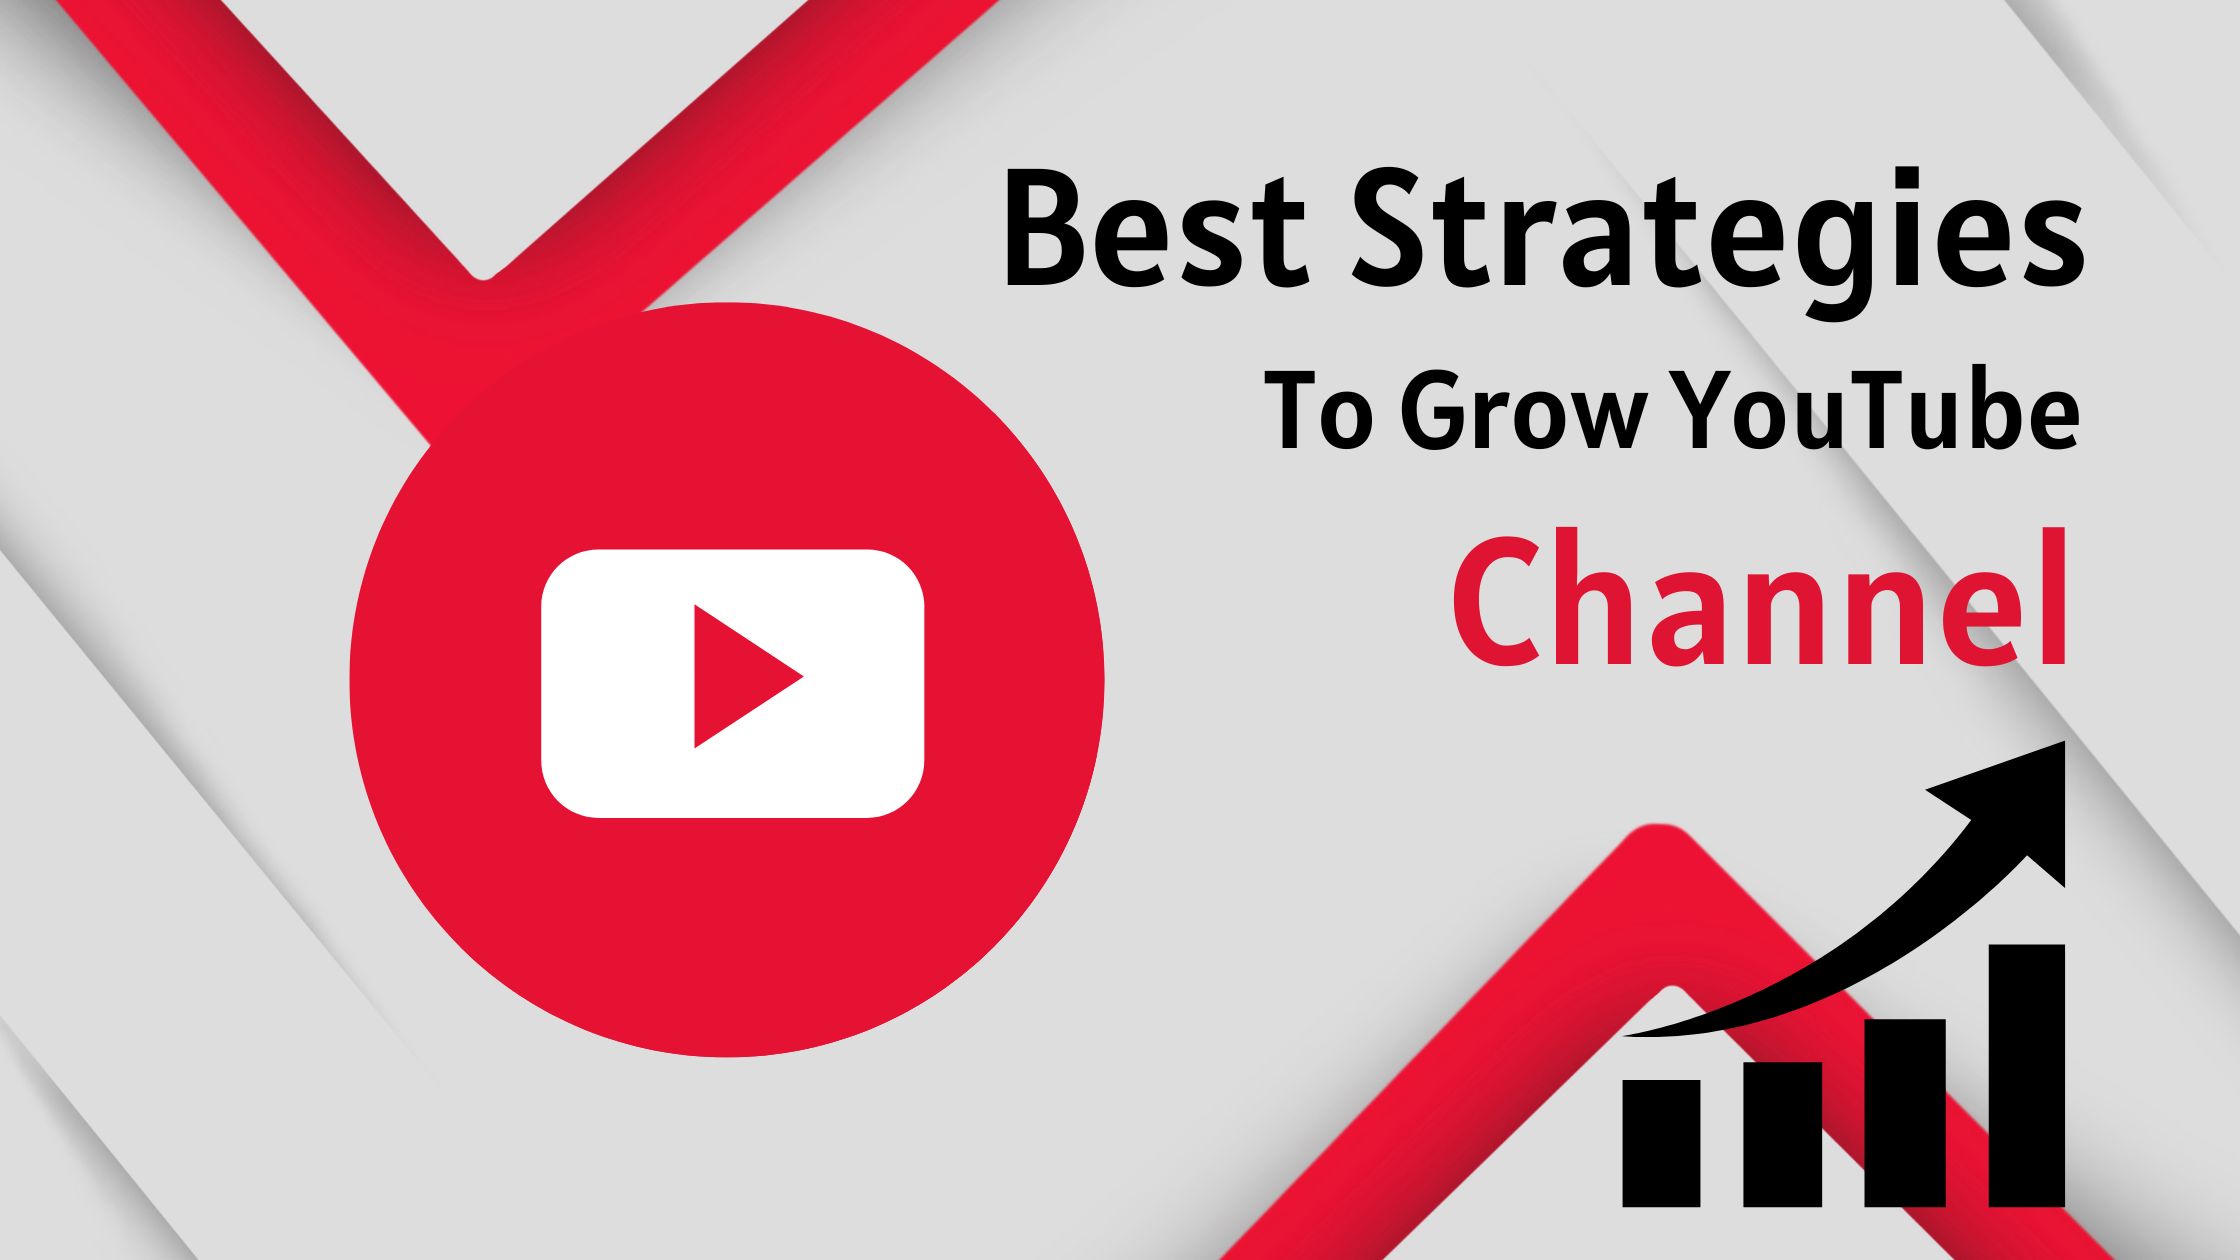 Best Strategies To Grow YouTube Channel